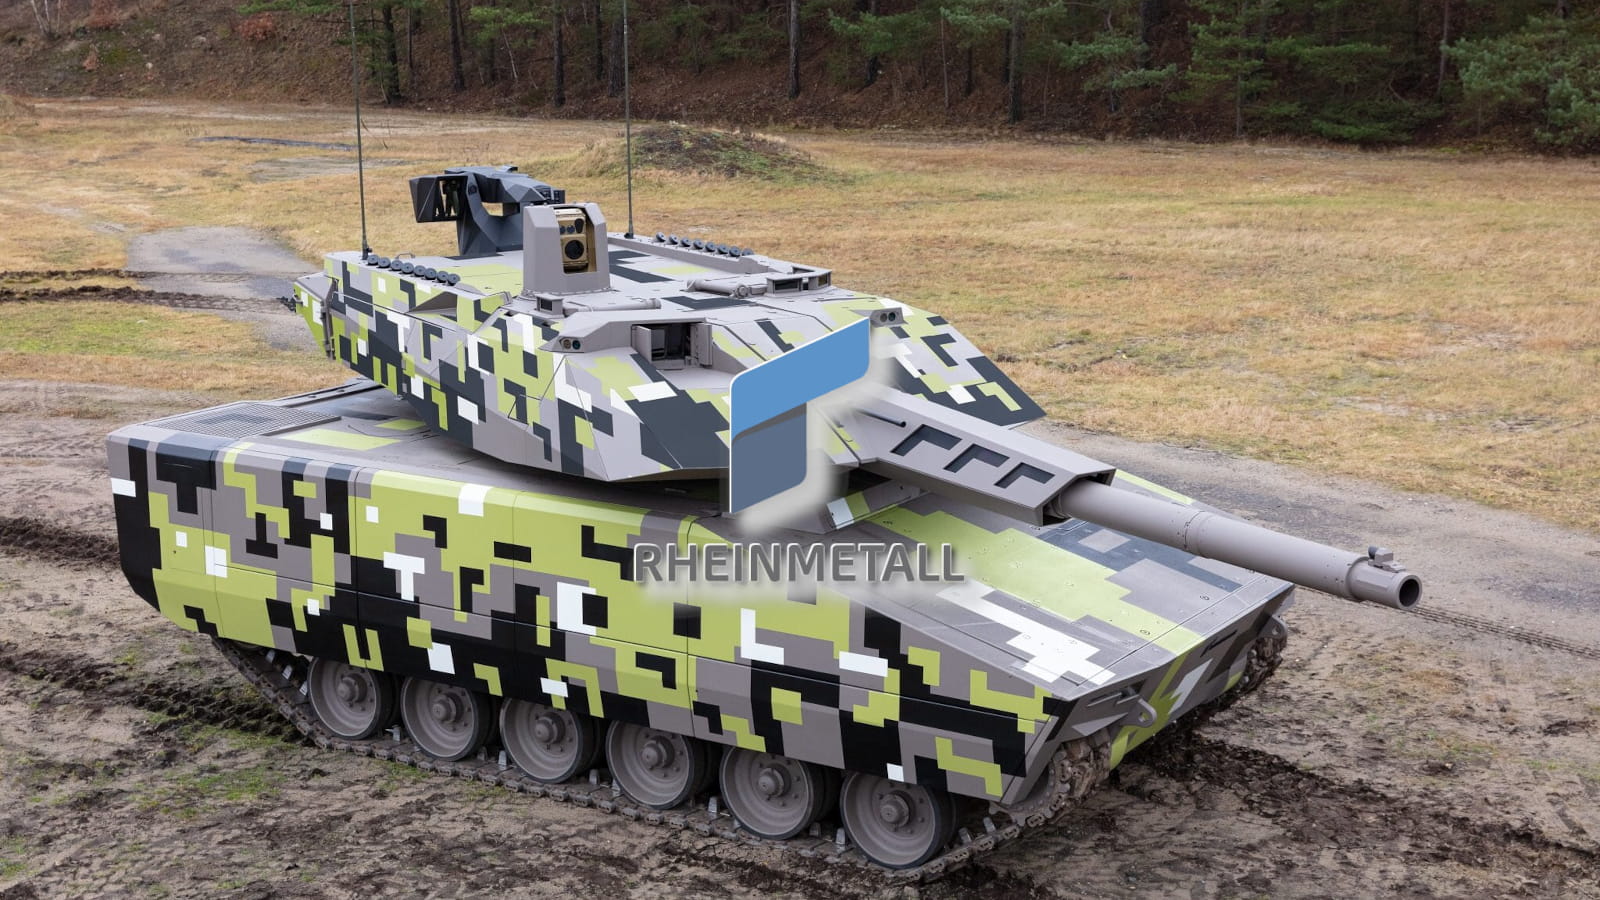 A camouflaged tank on a dirt road, providing cybersecurity solutions.